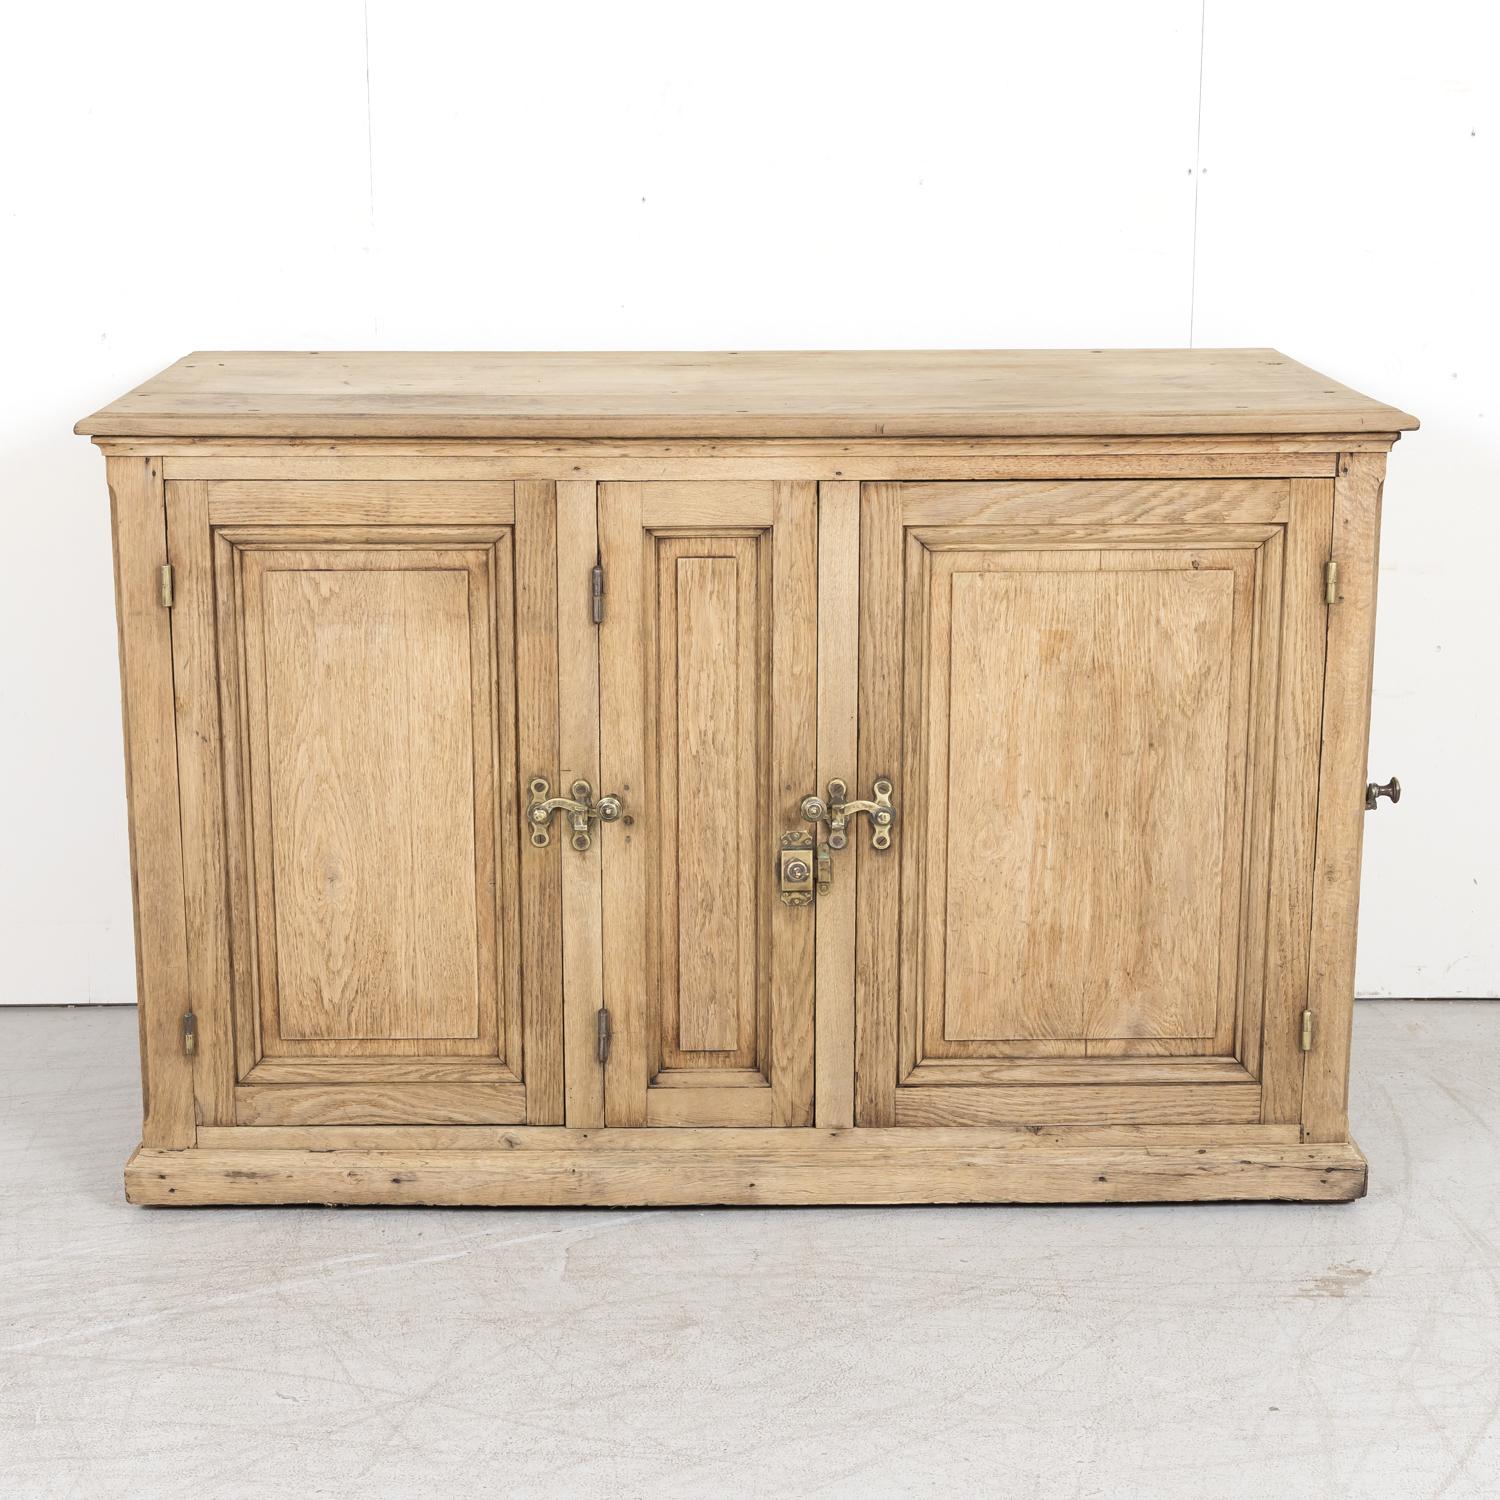 A fabulous large antique French industrial icebox from Normandy in bleached oak, circa 1920s, that is lined with zinc, having three front doors and a single door on the left side, all with original brass hardware. The four panel doors open to reveal